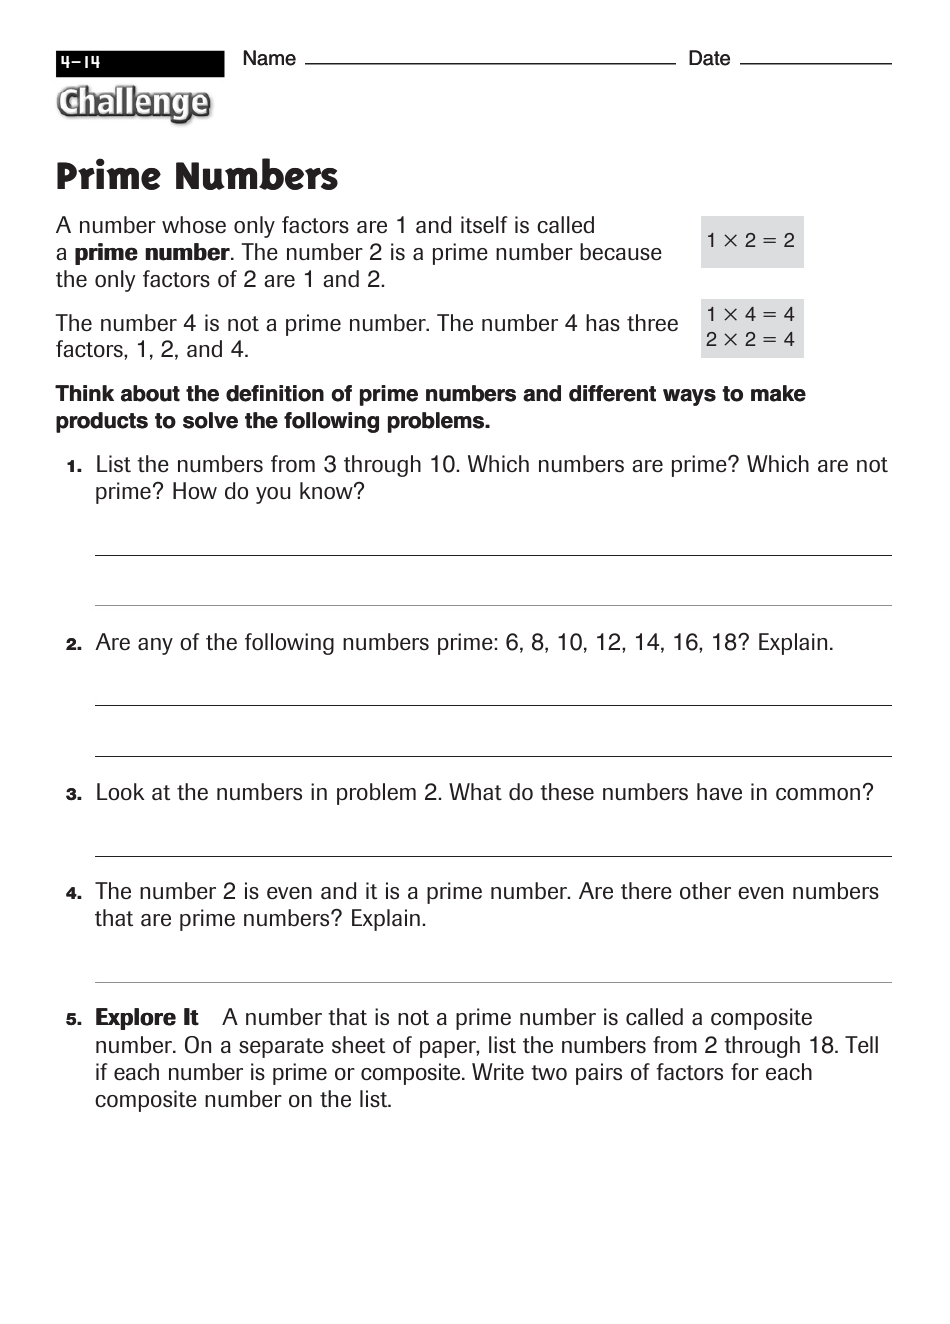 Prime Numbers Worksheet With Answers - 4-14 Challenge Preview